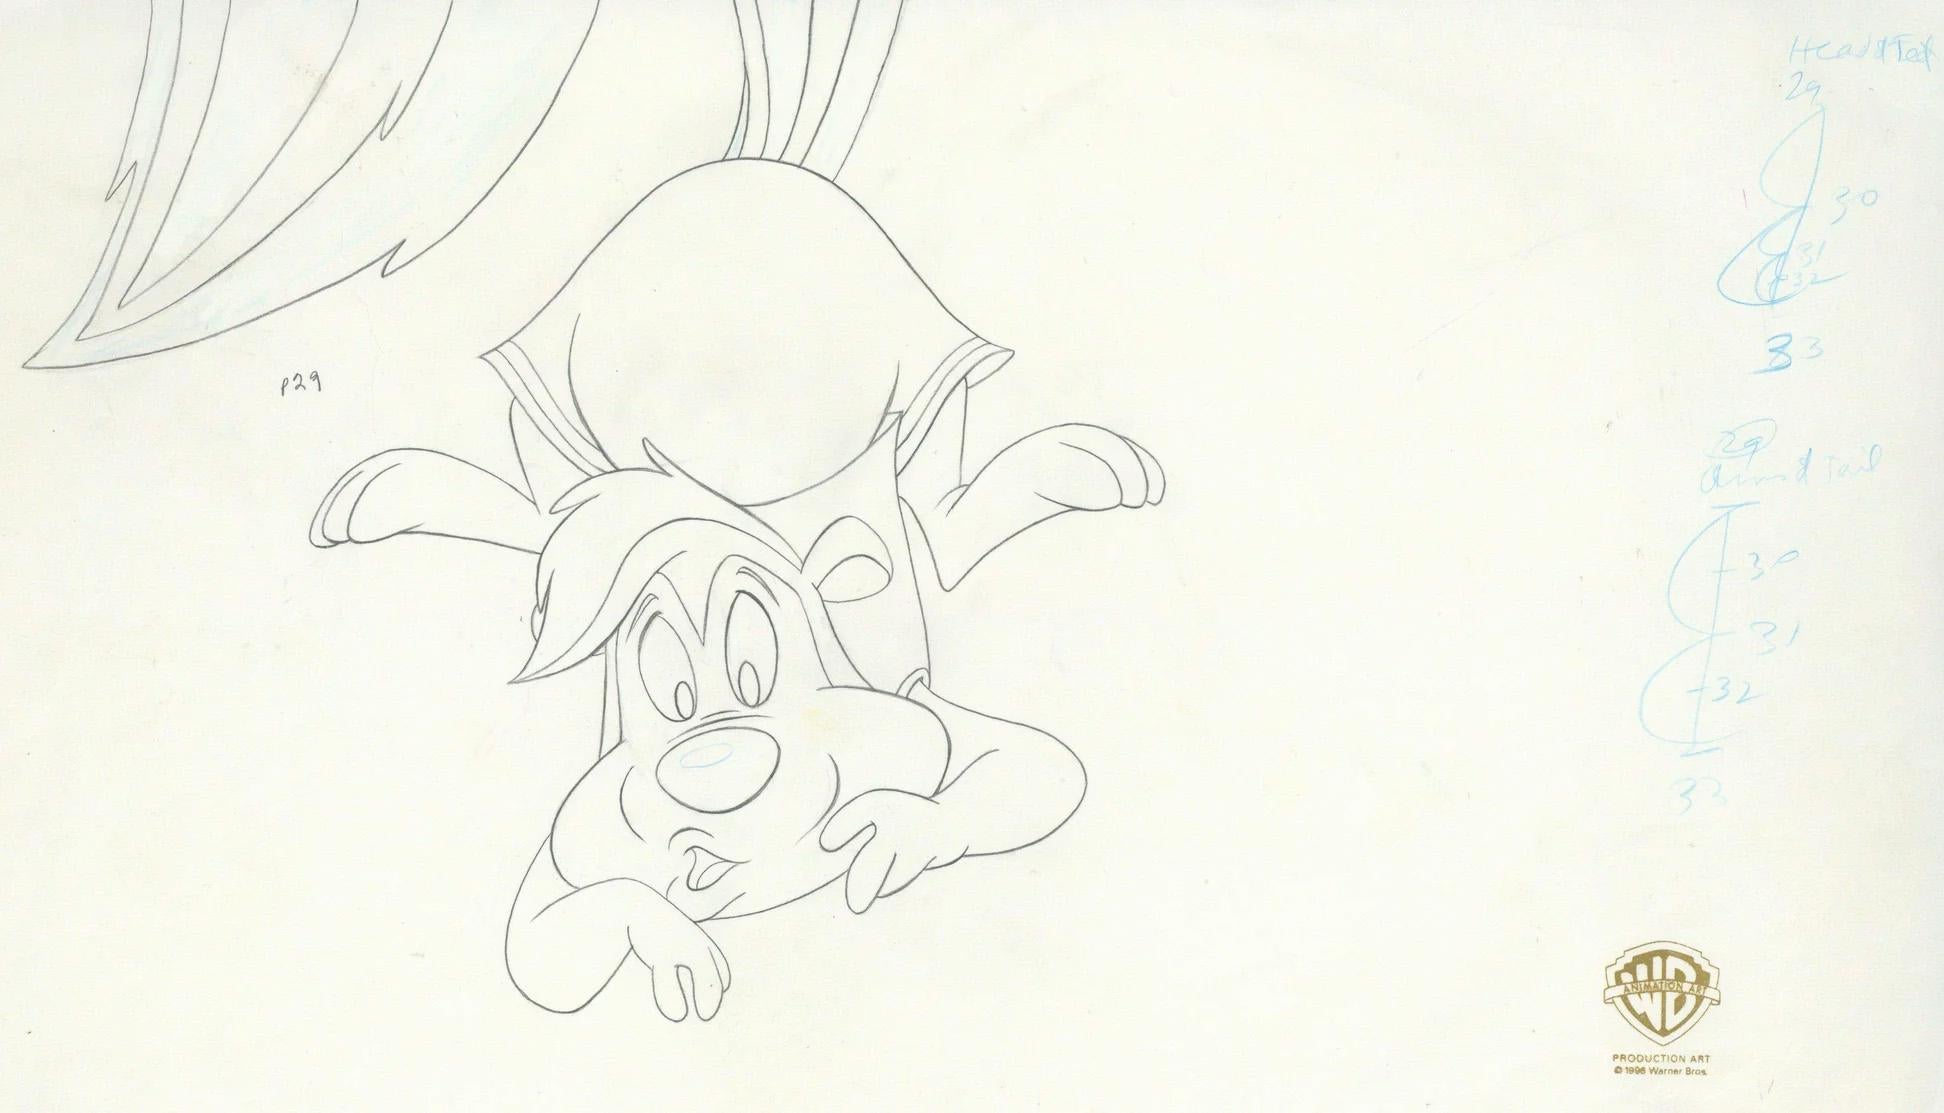 Space Jam Original Production Drawing: Pepe Le Pew - Art by Looney Tunes Studio Artists